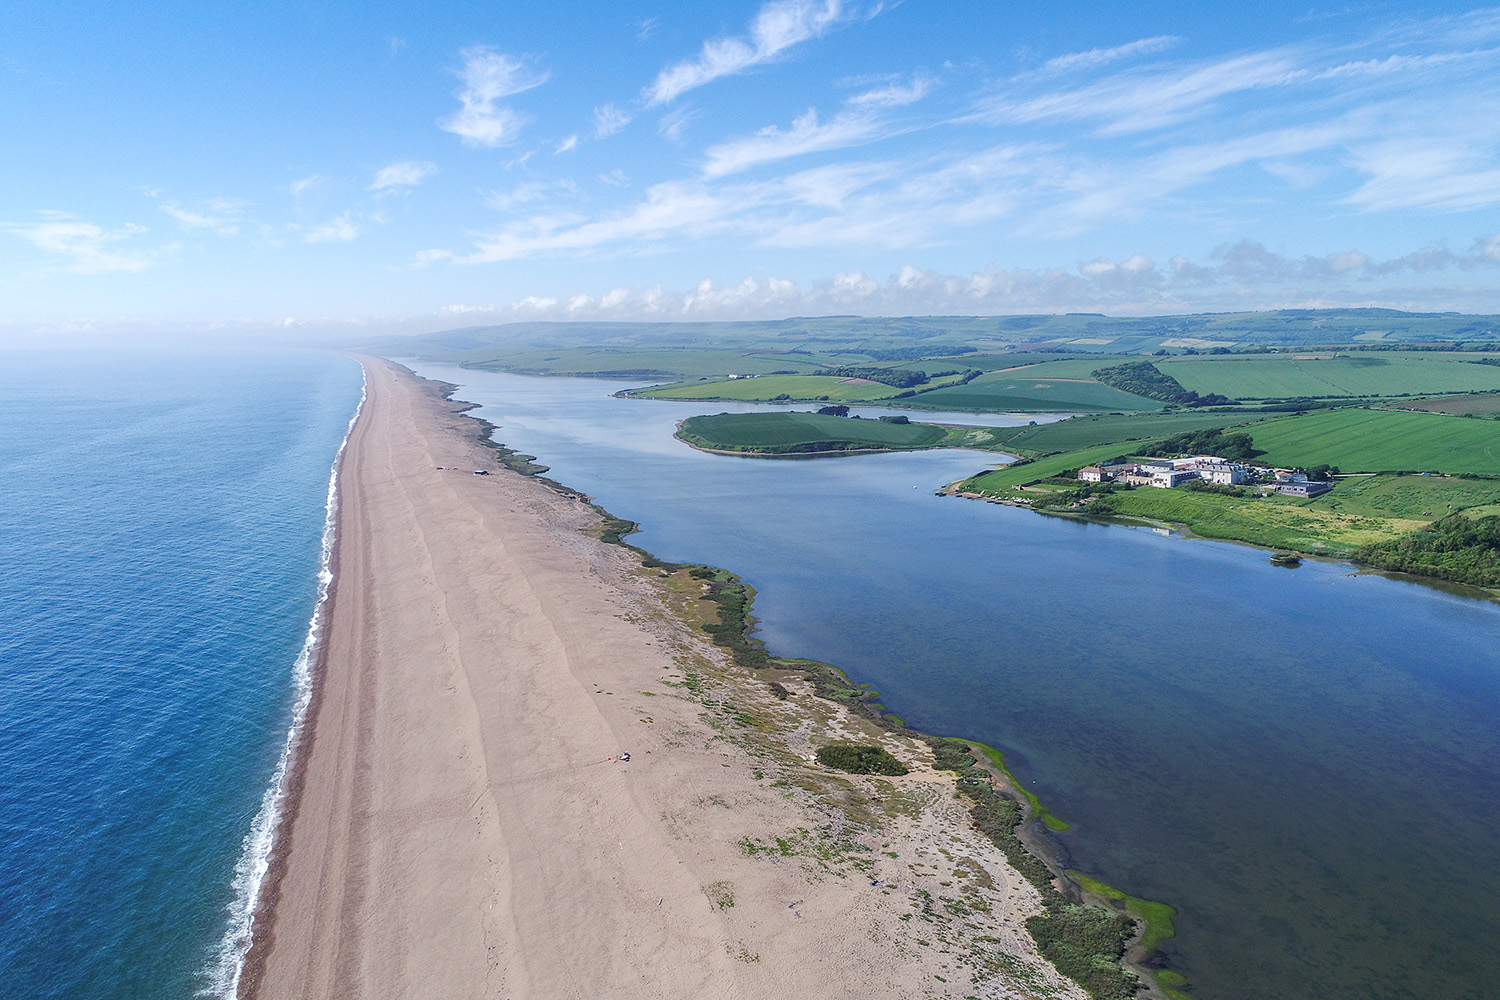 Chesil Beach - The Perfect Picture - Top 10 To Do List